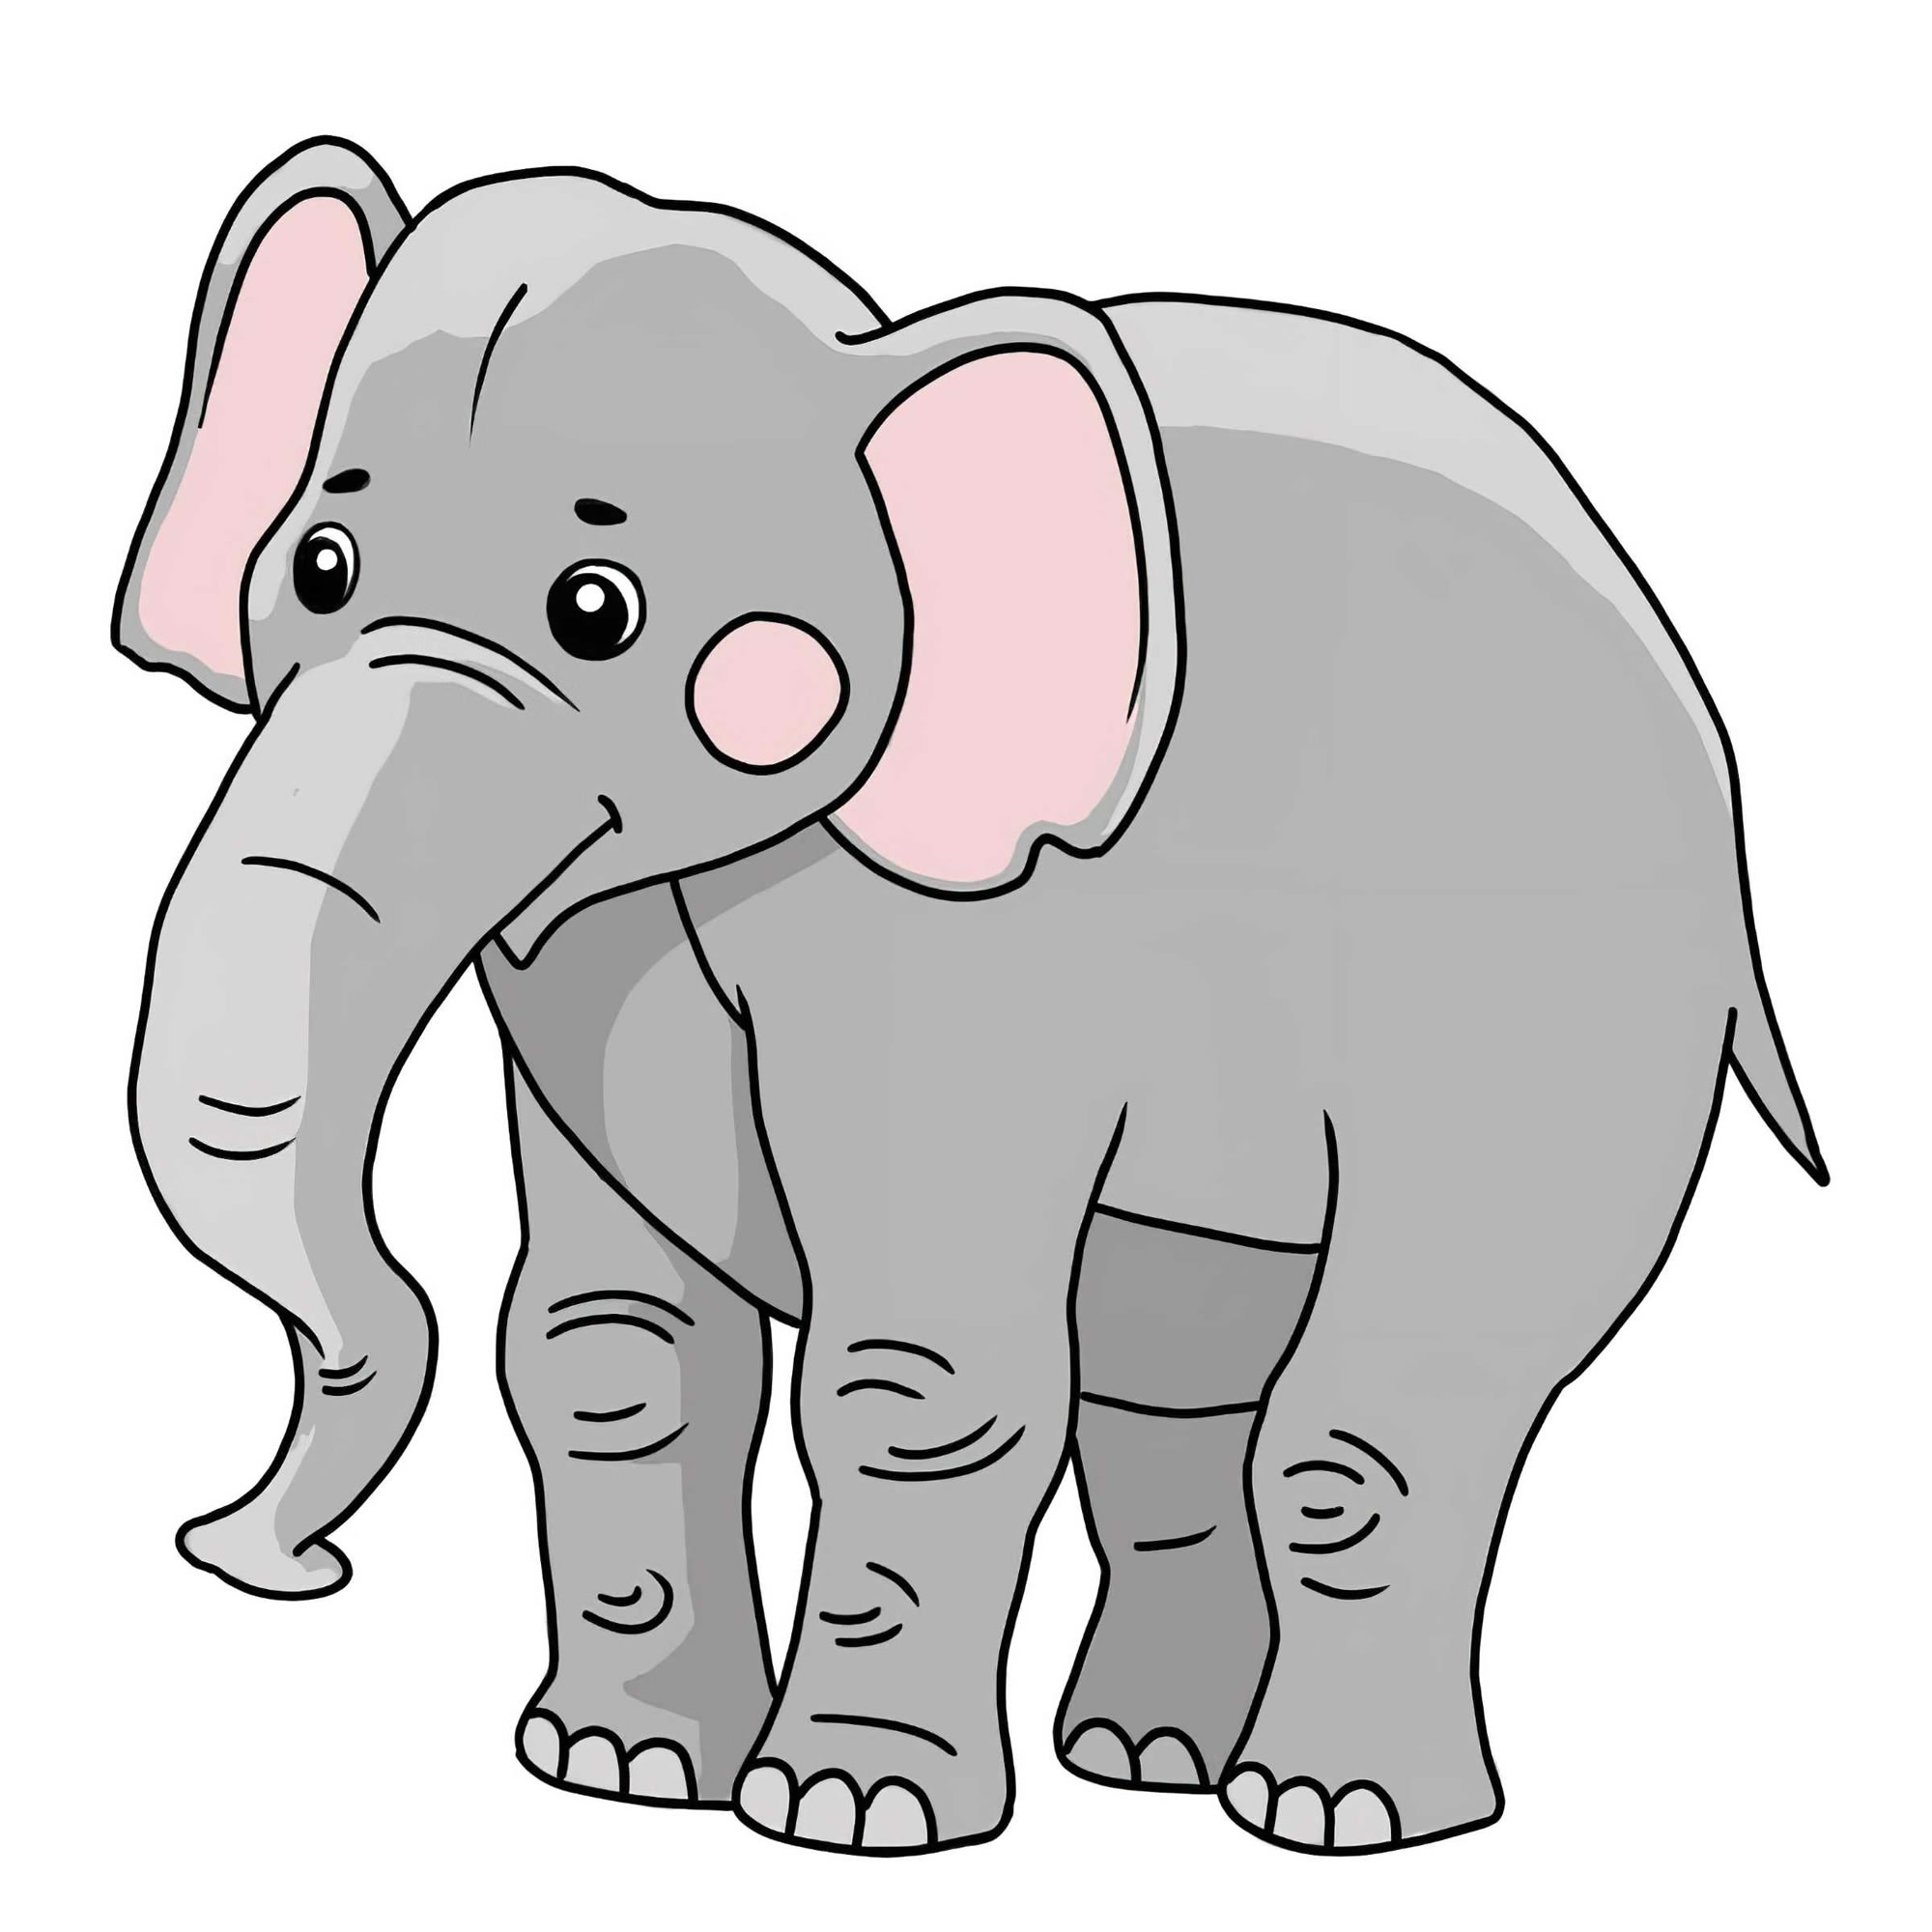 Coloring book Elephant for children 3, 4, 5, 6, 7, 8 years old: 26 coloring pages